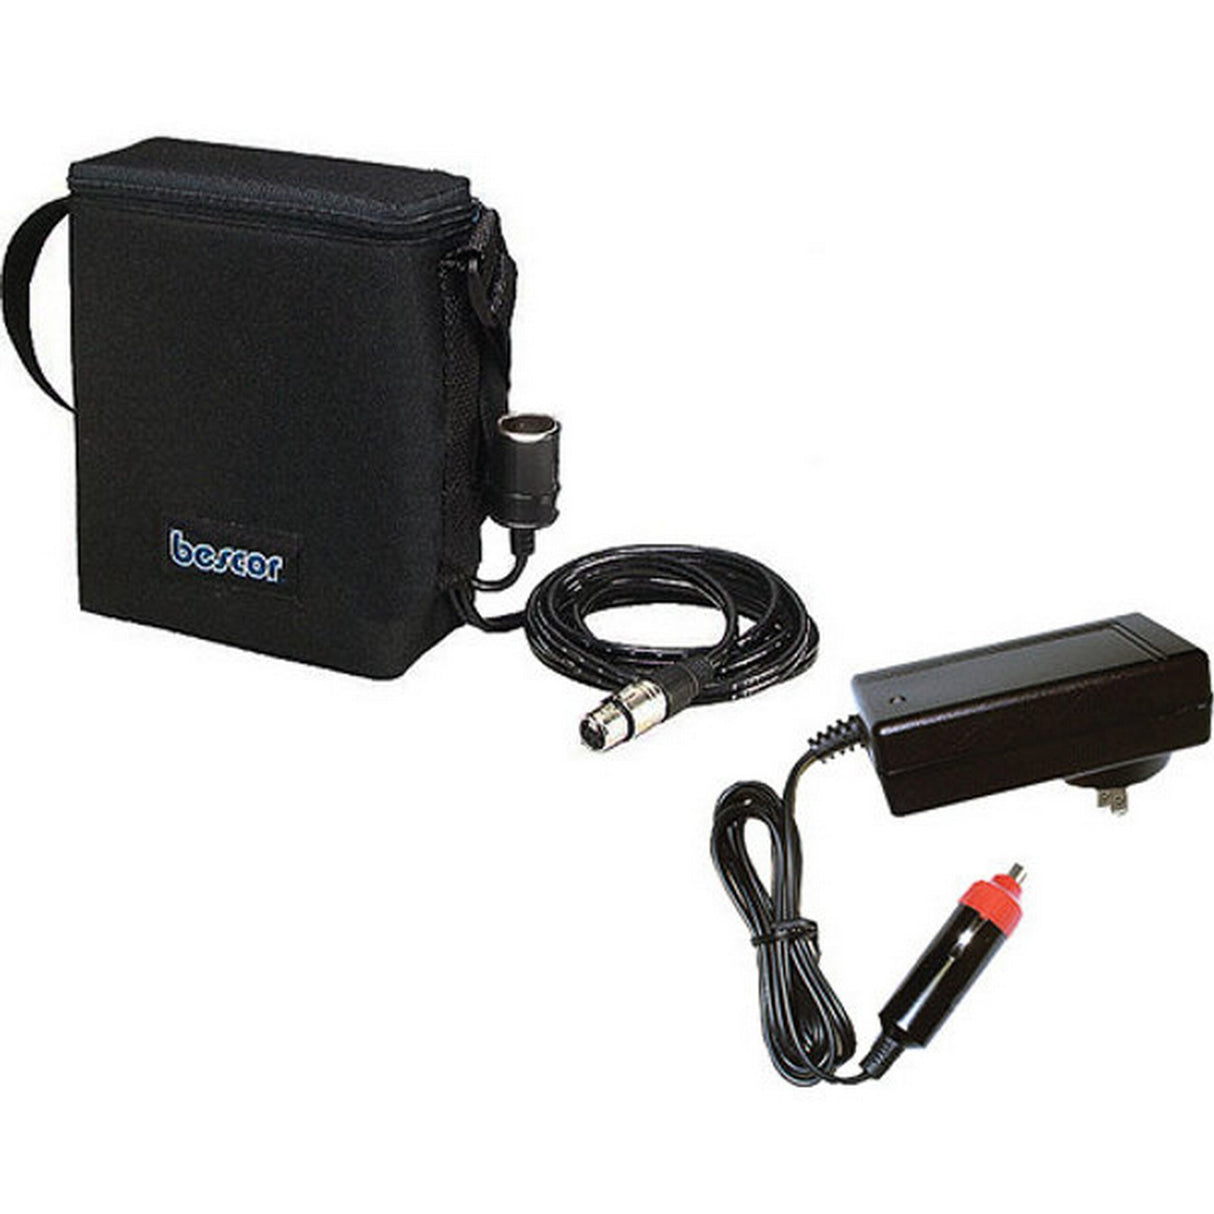 Bescor MM-12XLRATM 12V/12A SLA Battery Pack with 4-Pin XLR and Auto Charger